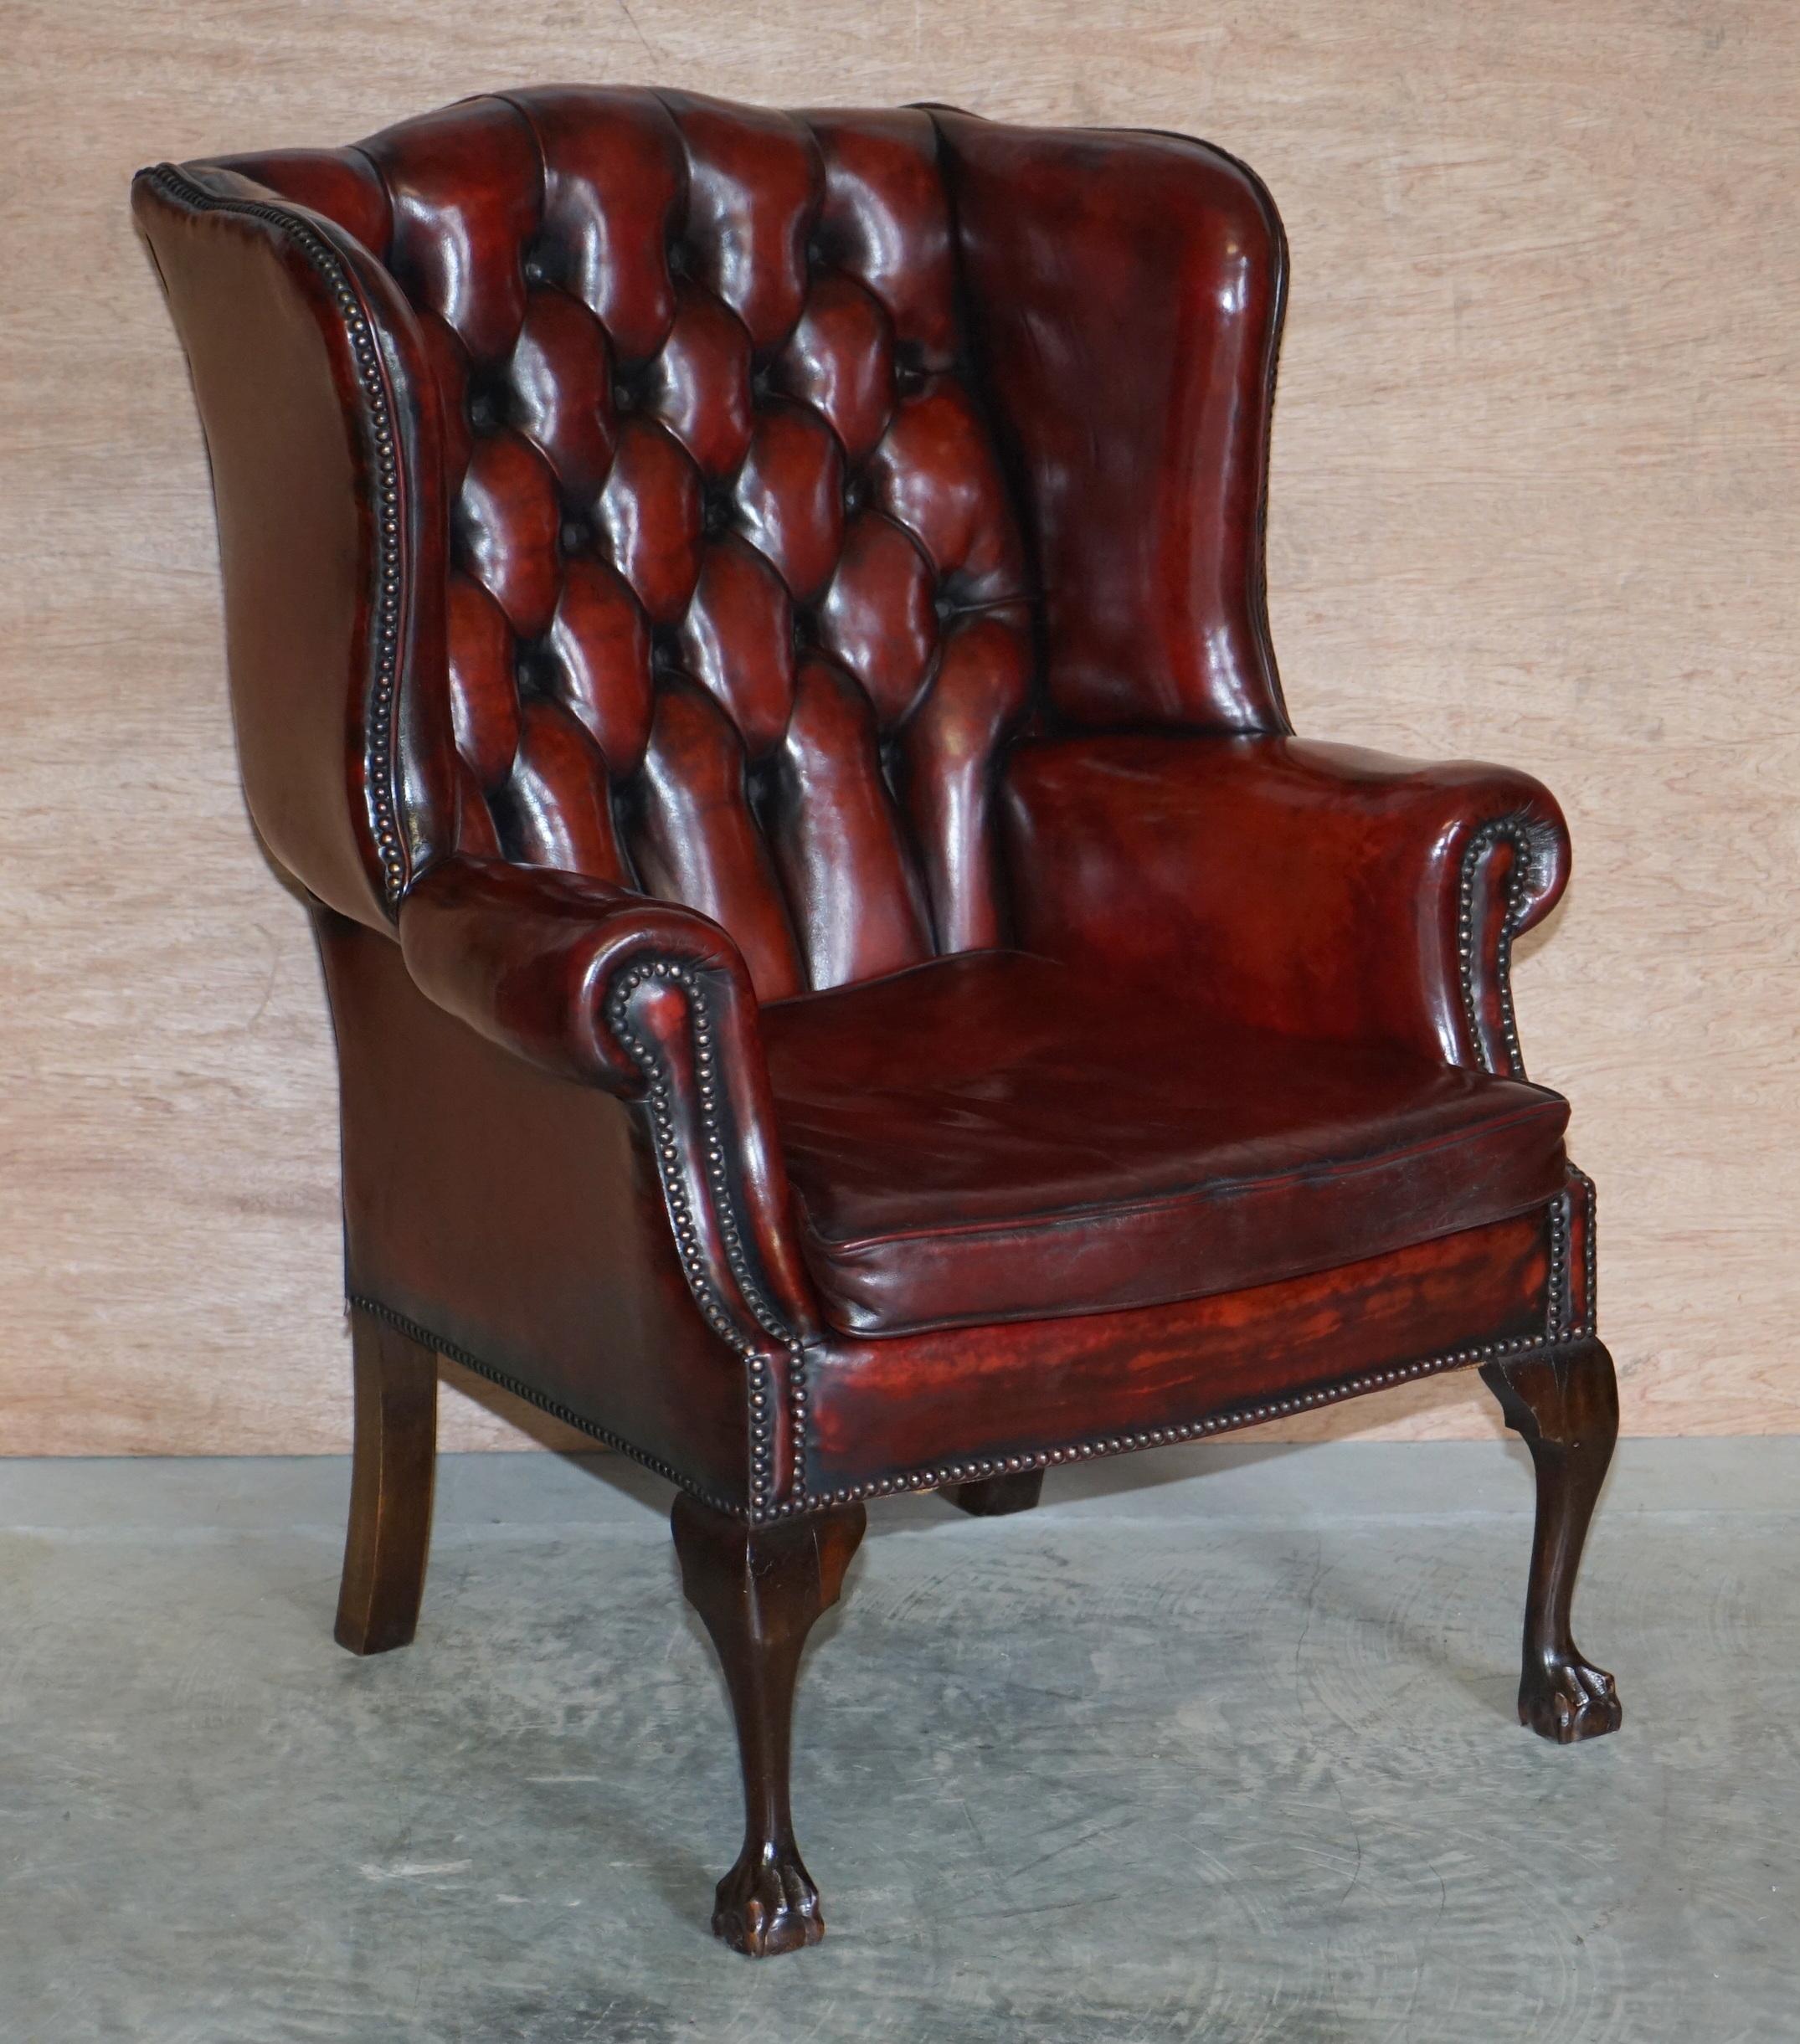 We are delighted to offer this stunning pair of Chesterfield Bordeaux leather fully restored circa 1900 wingback armchairs with hand carved claw and ball feet

A good looking and well made pair, nice to see with the hand carved claw and ball feet,